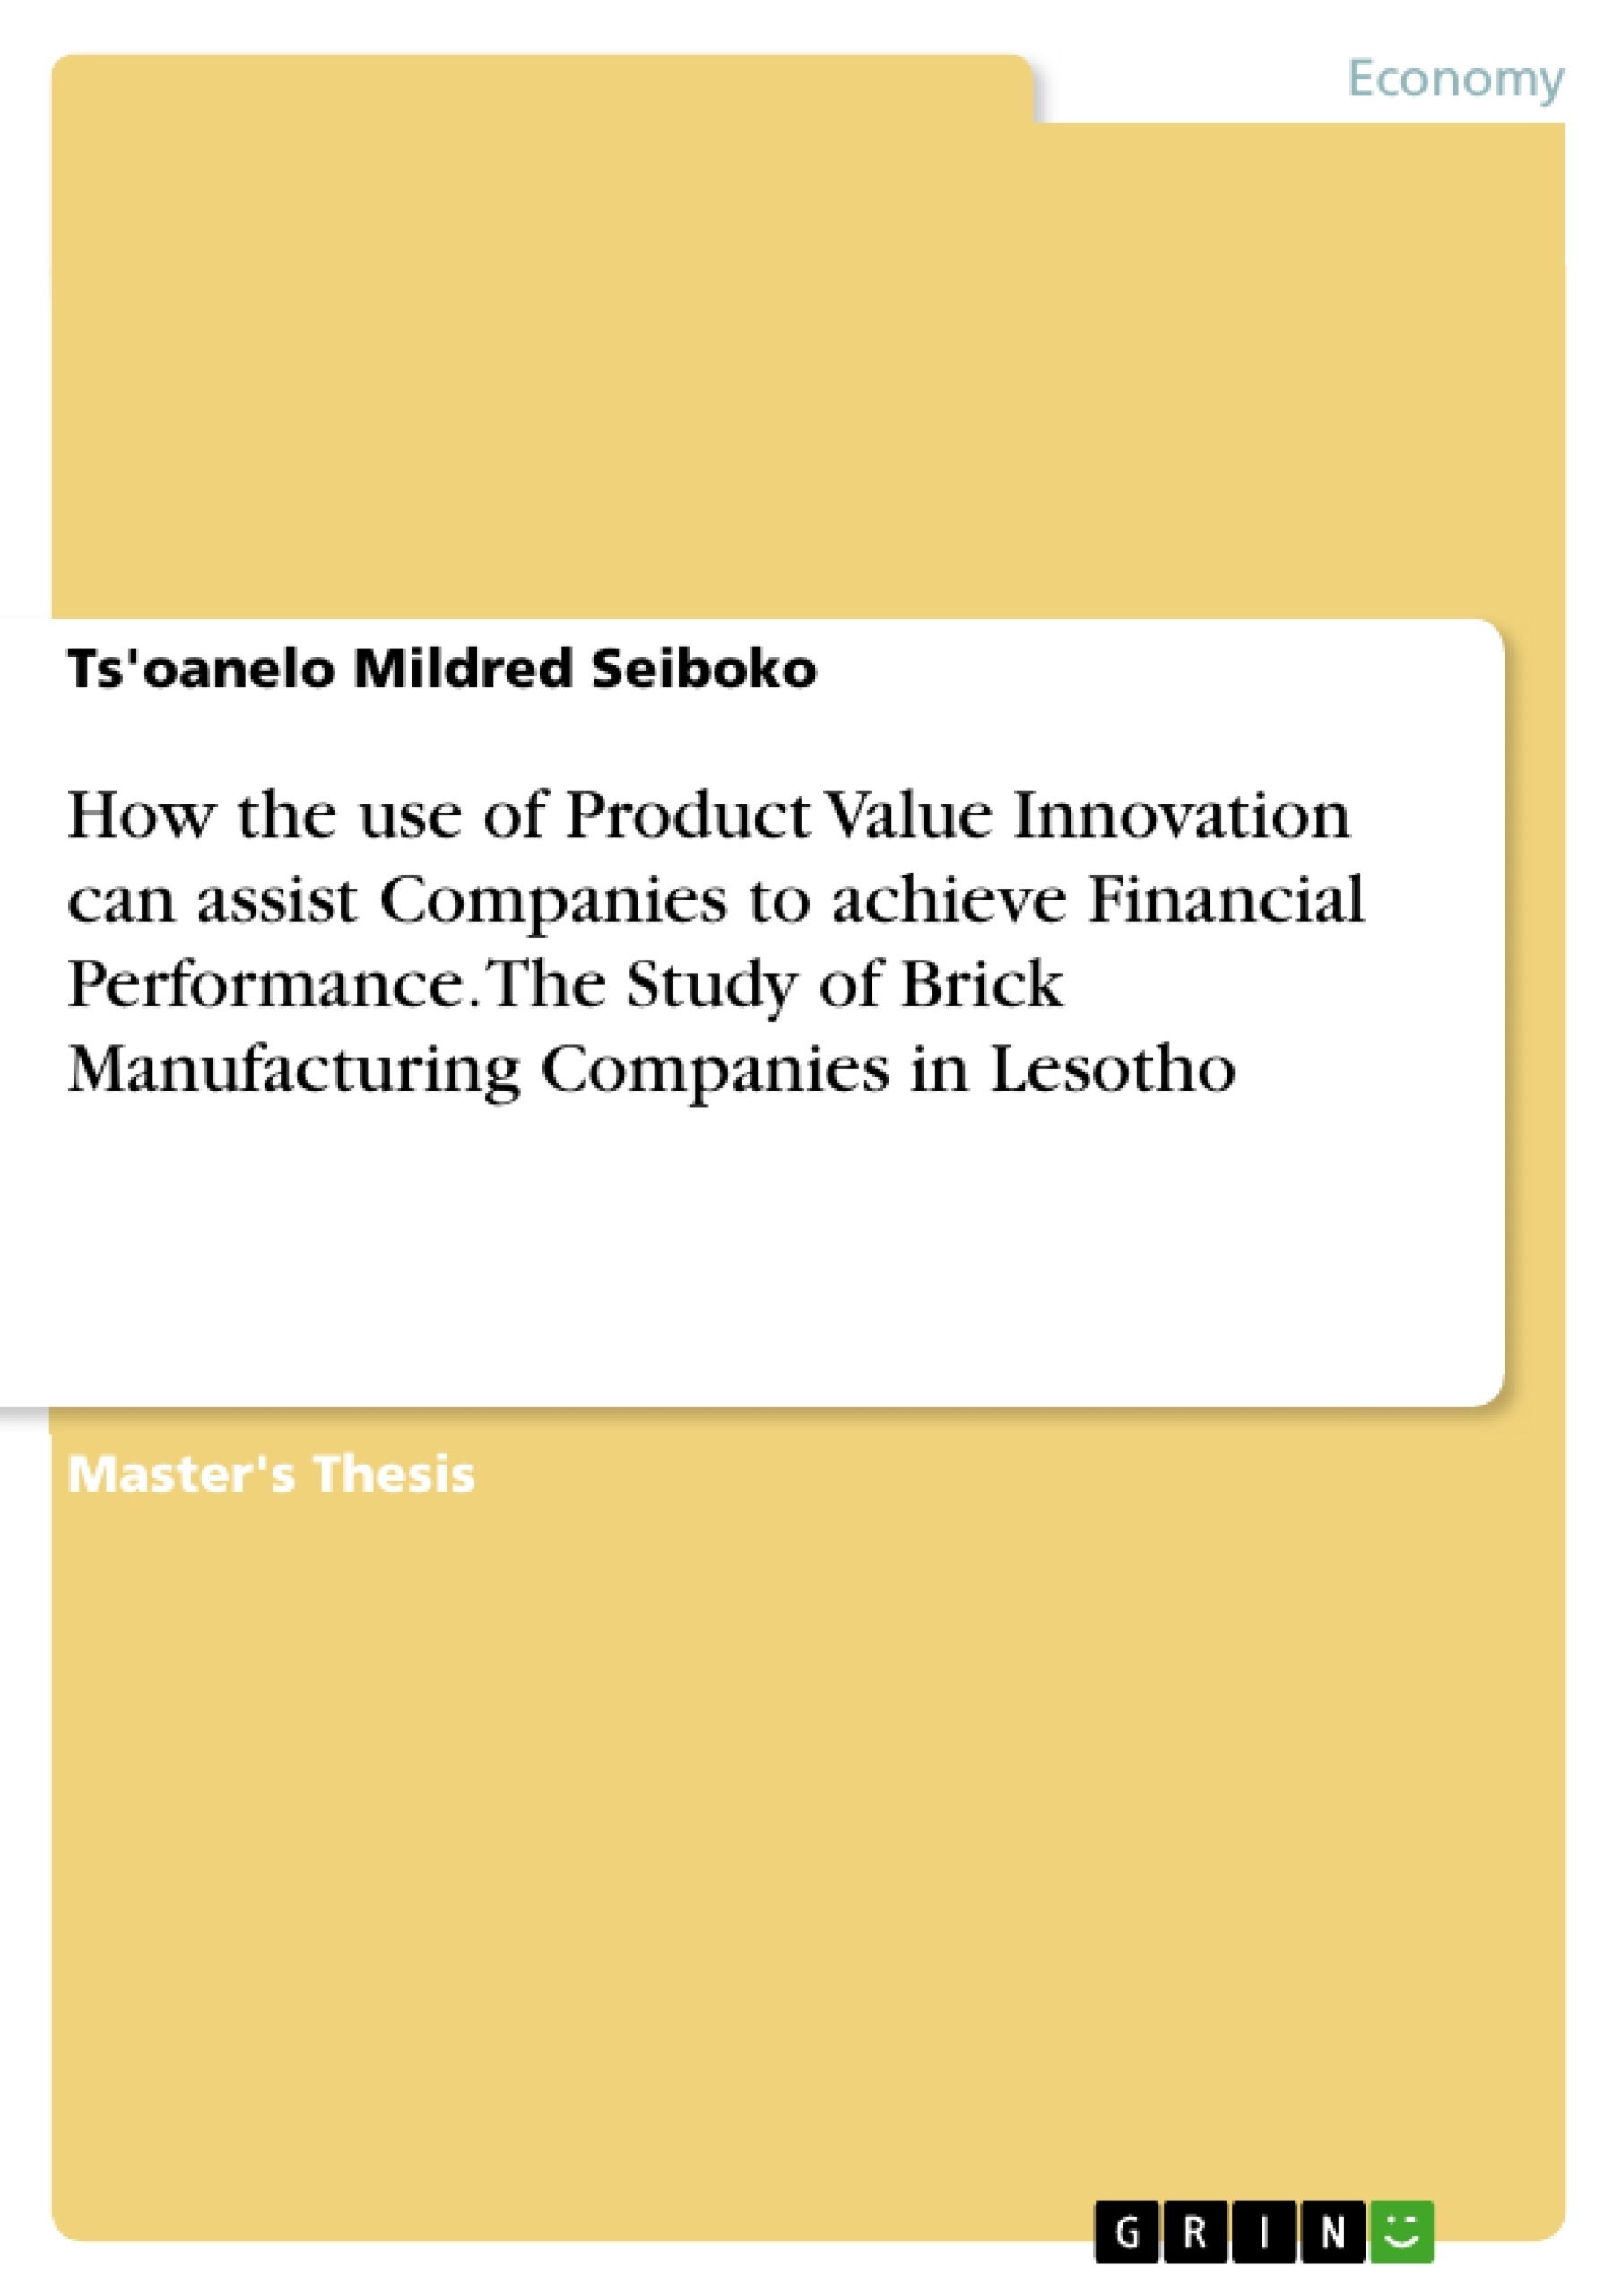 Title: How the use of Product Value Innovation can assist Companies to achieve Financial Performance. The Study of Brick Manufacturing Companies in Lesotho